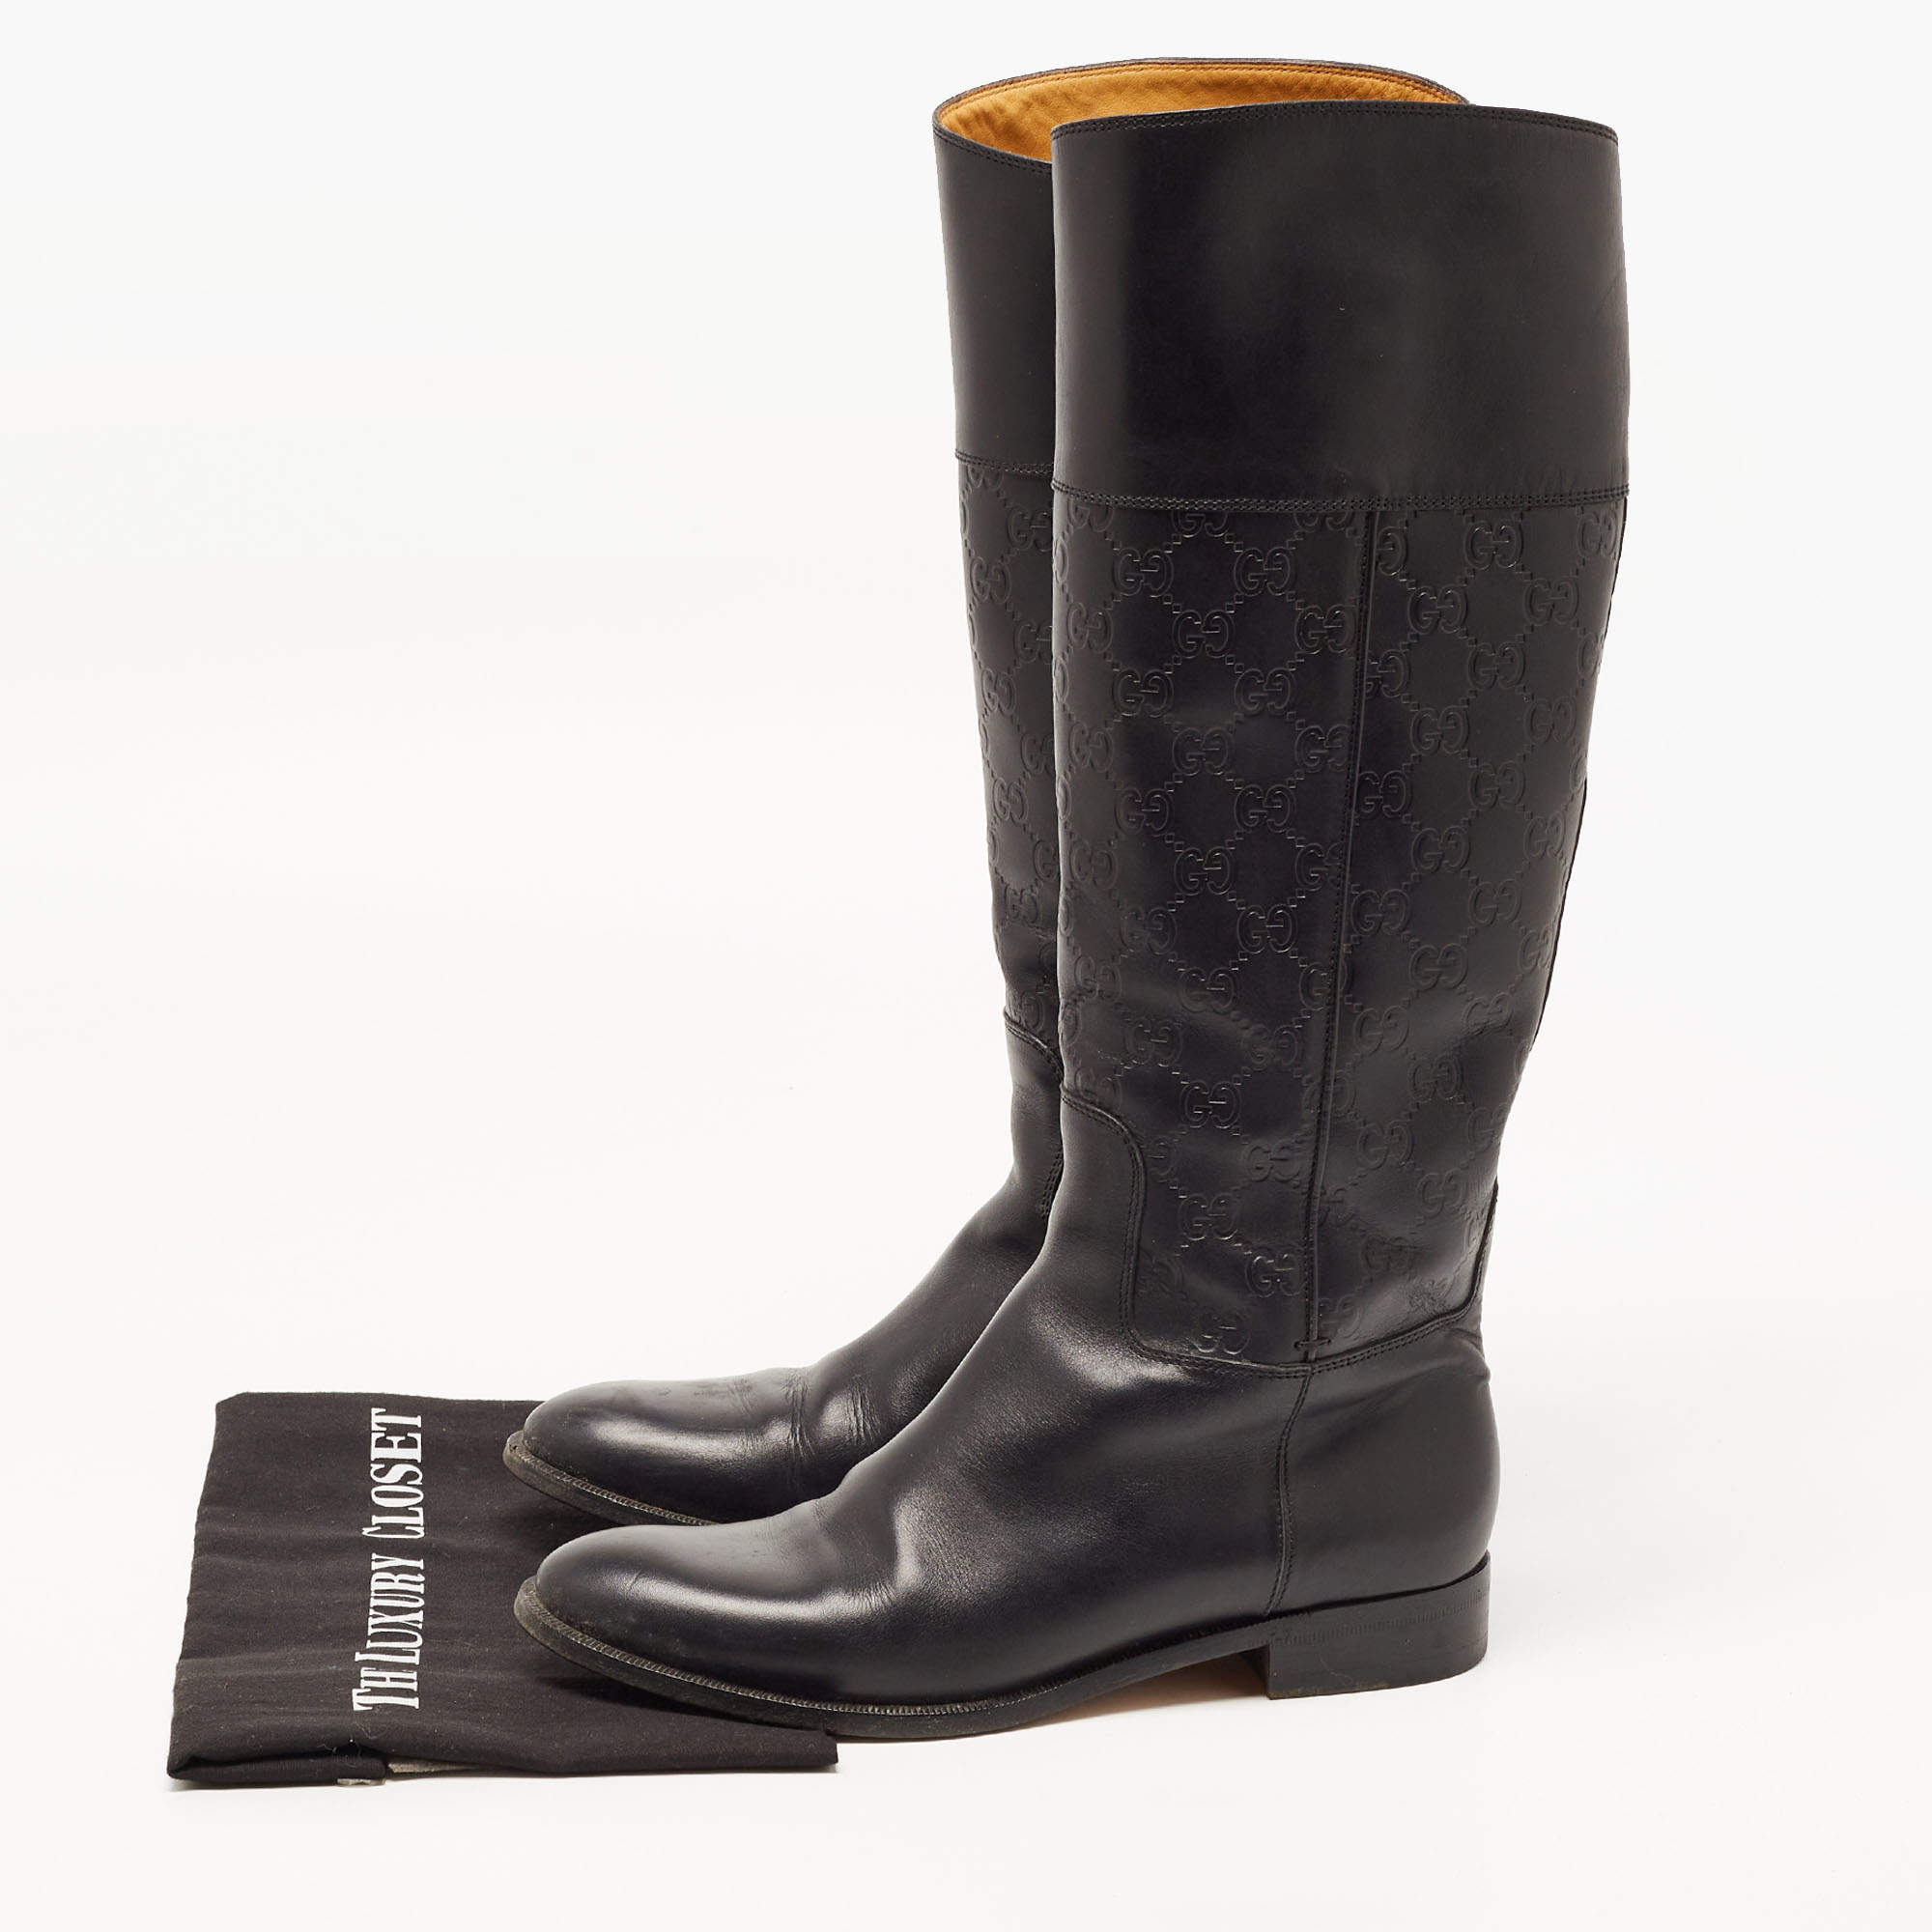 Gucci Monogram-Embossed Mid-Calf Boots